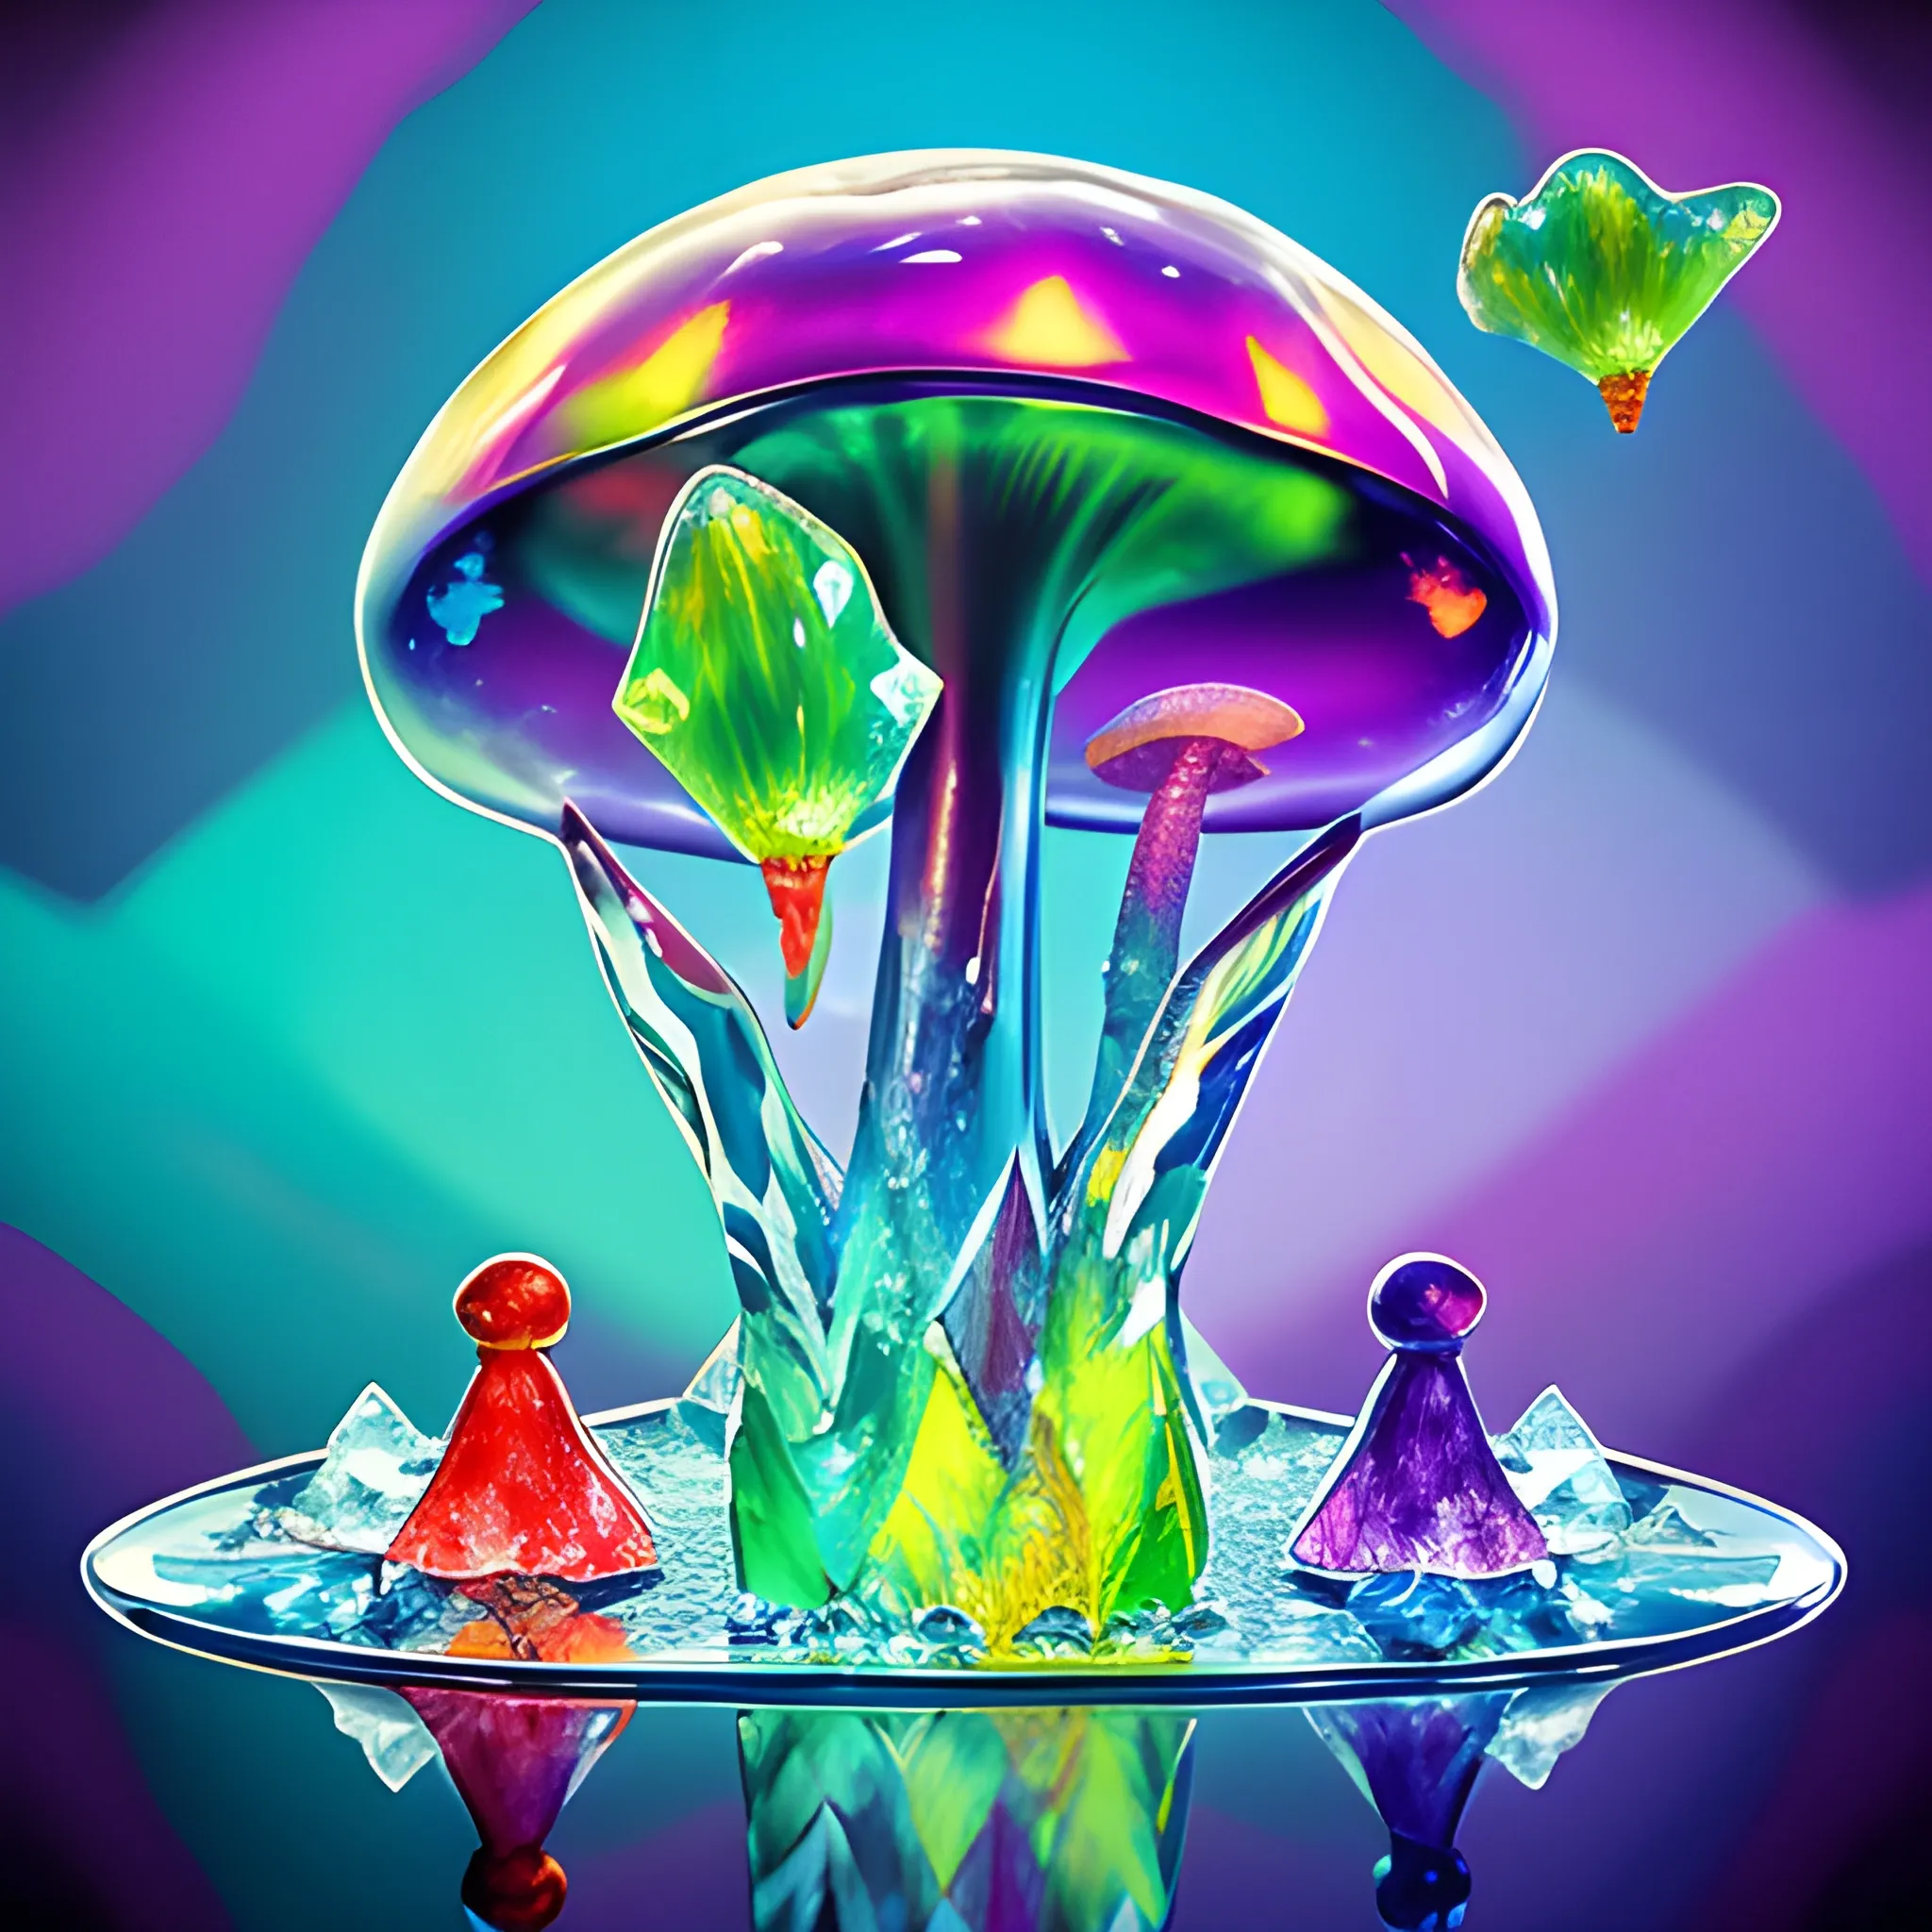  a crystal mushrooms with human face, crystal frogs around, many ice cubes fly in the air , saturated colors, surrealism, chaotic background, 3D, Trippy,  eerie atmosphere, close up, Oil Painting, angular perspective 